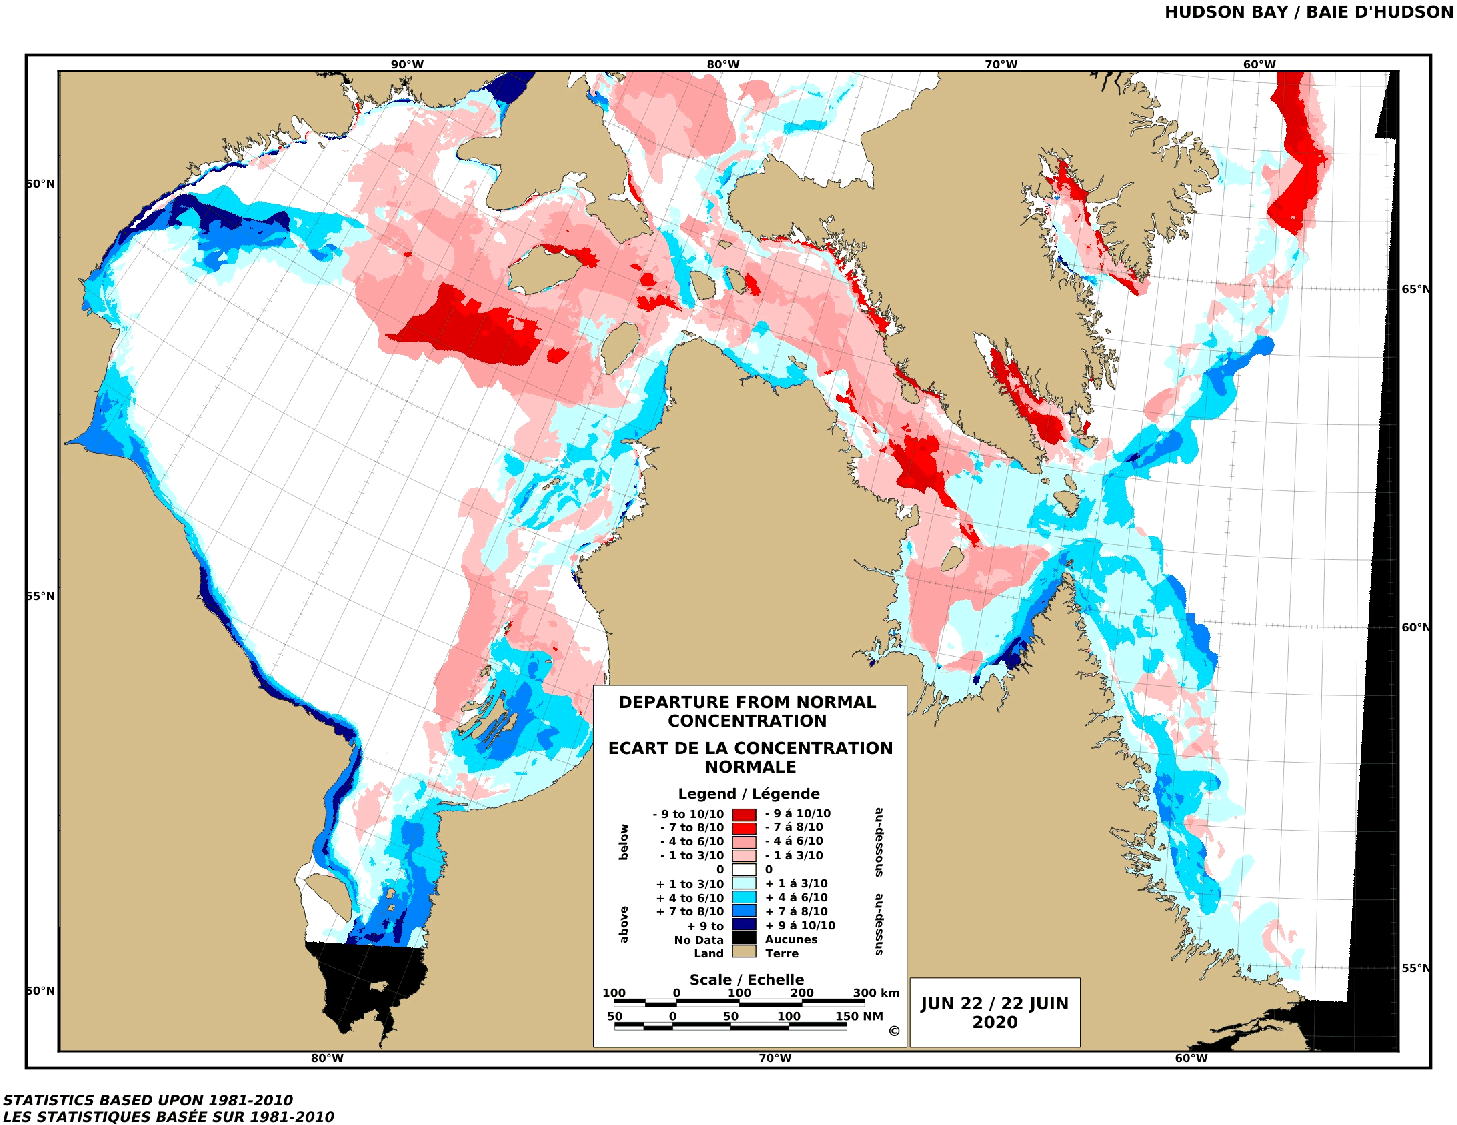 Ice concentration departure from normal [click to enlarge]